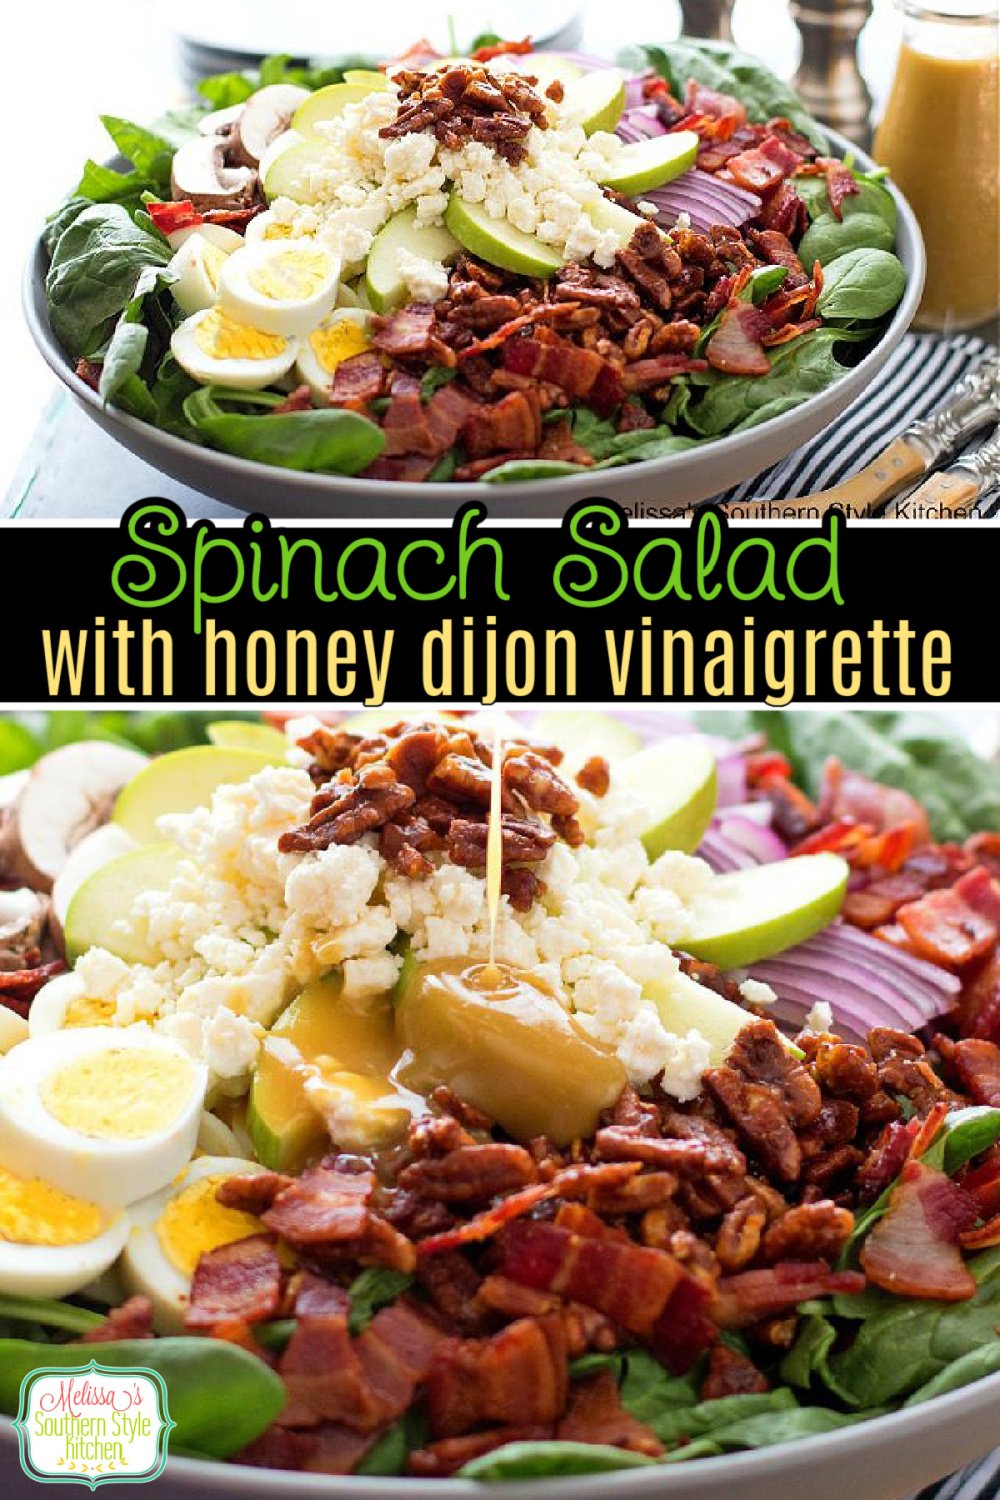 Enjoy this fresh Spinach Salad with Honey Dijon Vinaigrette as a side dish or topped with chicken or shrimp as an entree #spinachsalad #saladrecipes #homemadehoneydijondressing #honeymustard #sidedishrecipes #dinnerideas #spinachrecipes #southernfood #southernrecipes via @melissasssk